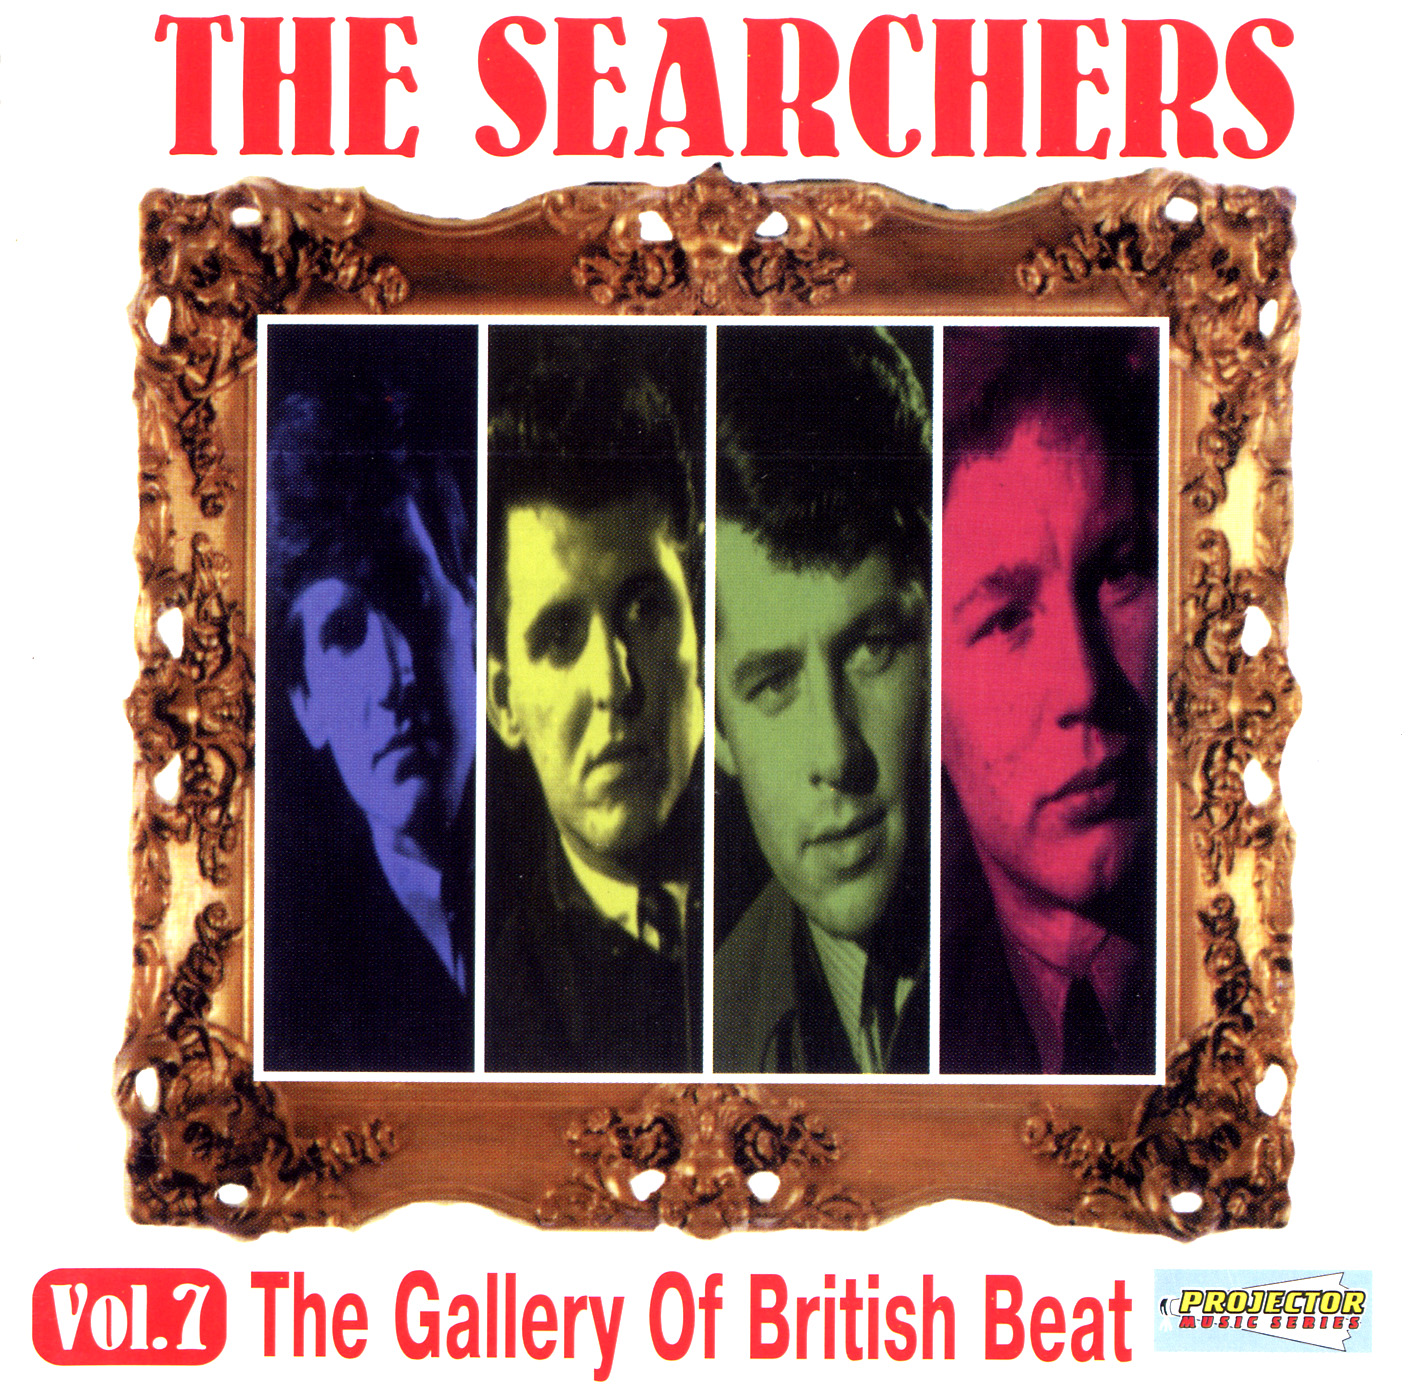 THE SEARCHERS The Gallery Of British Beat Vol.7